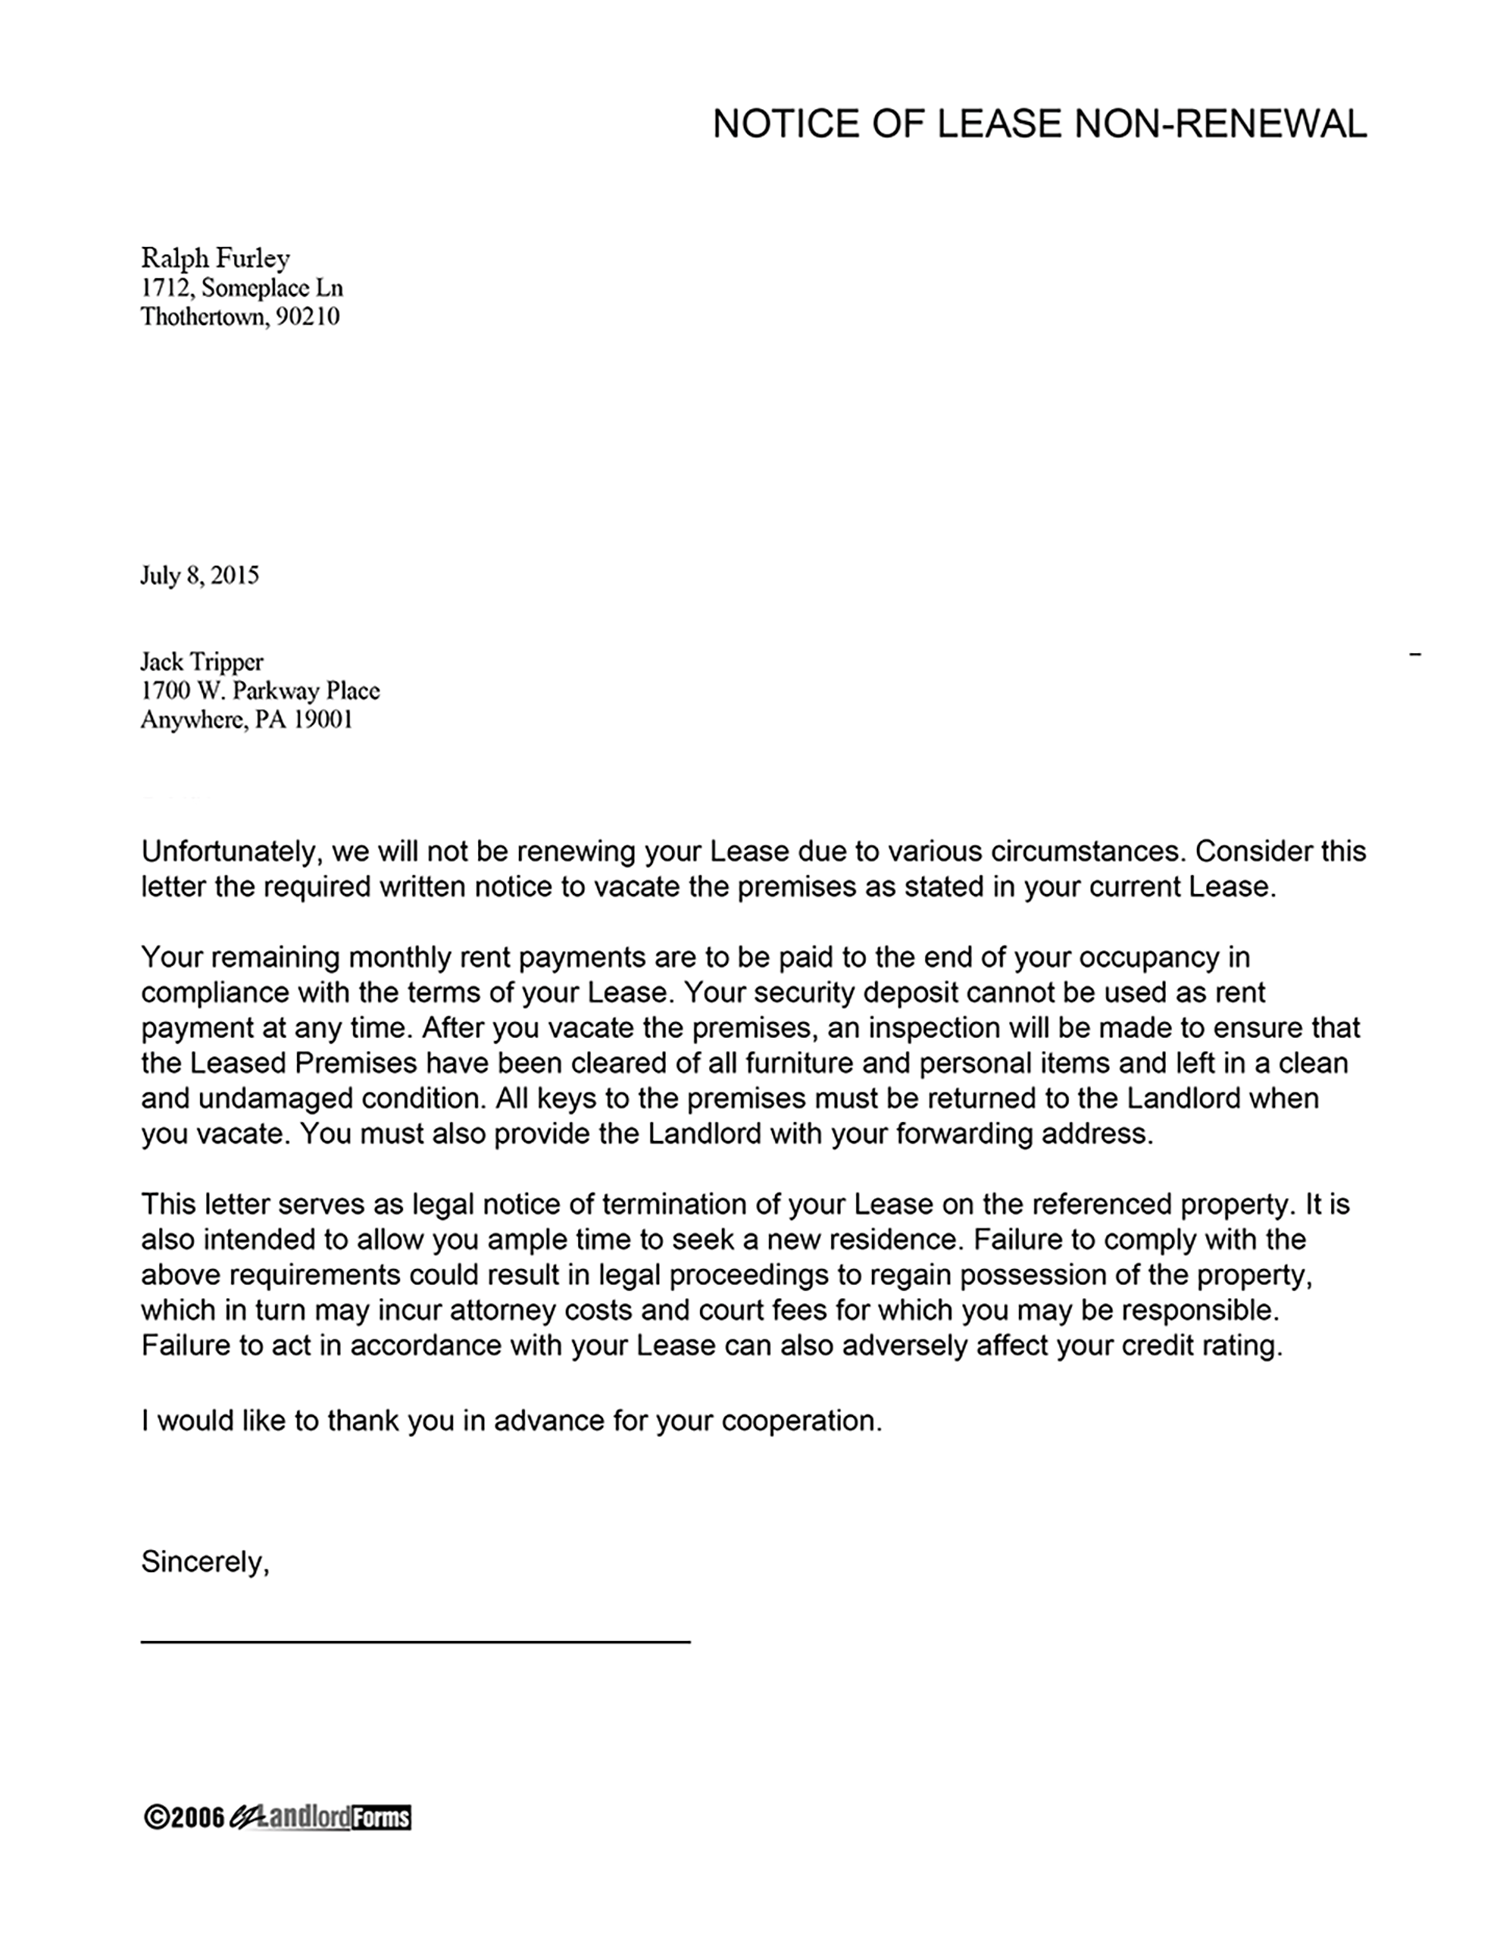 Sample Letter To Landlord To Terminate Lease from www.ezlandlordforms.com